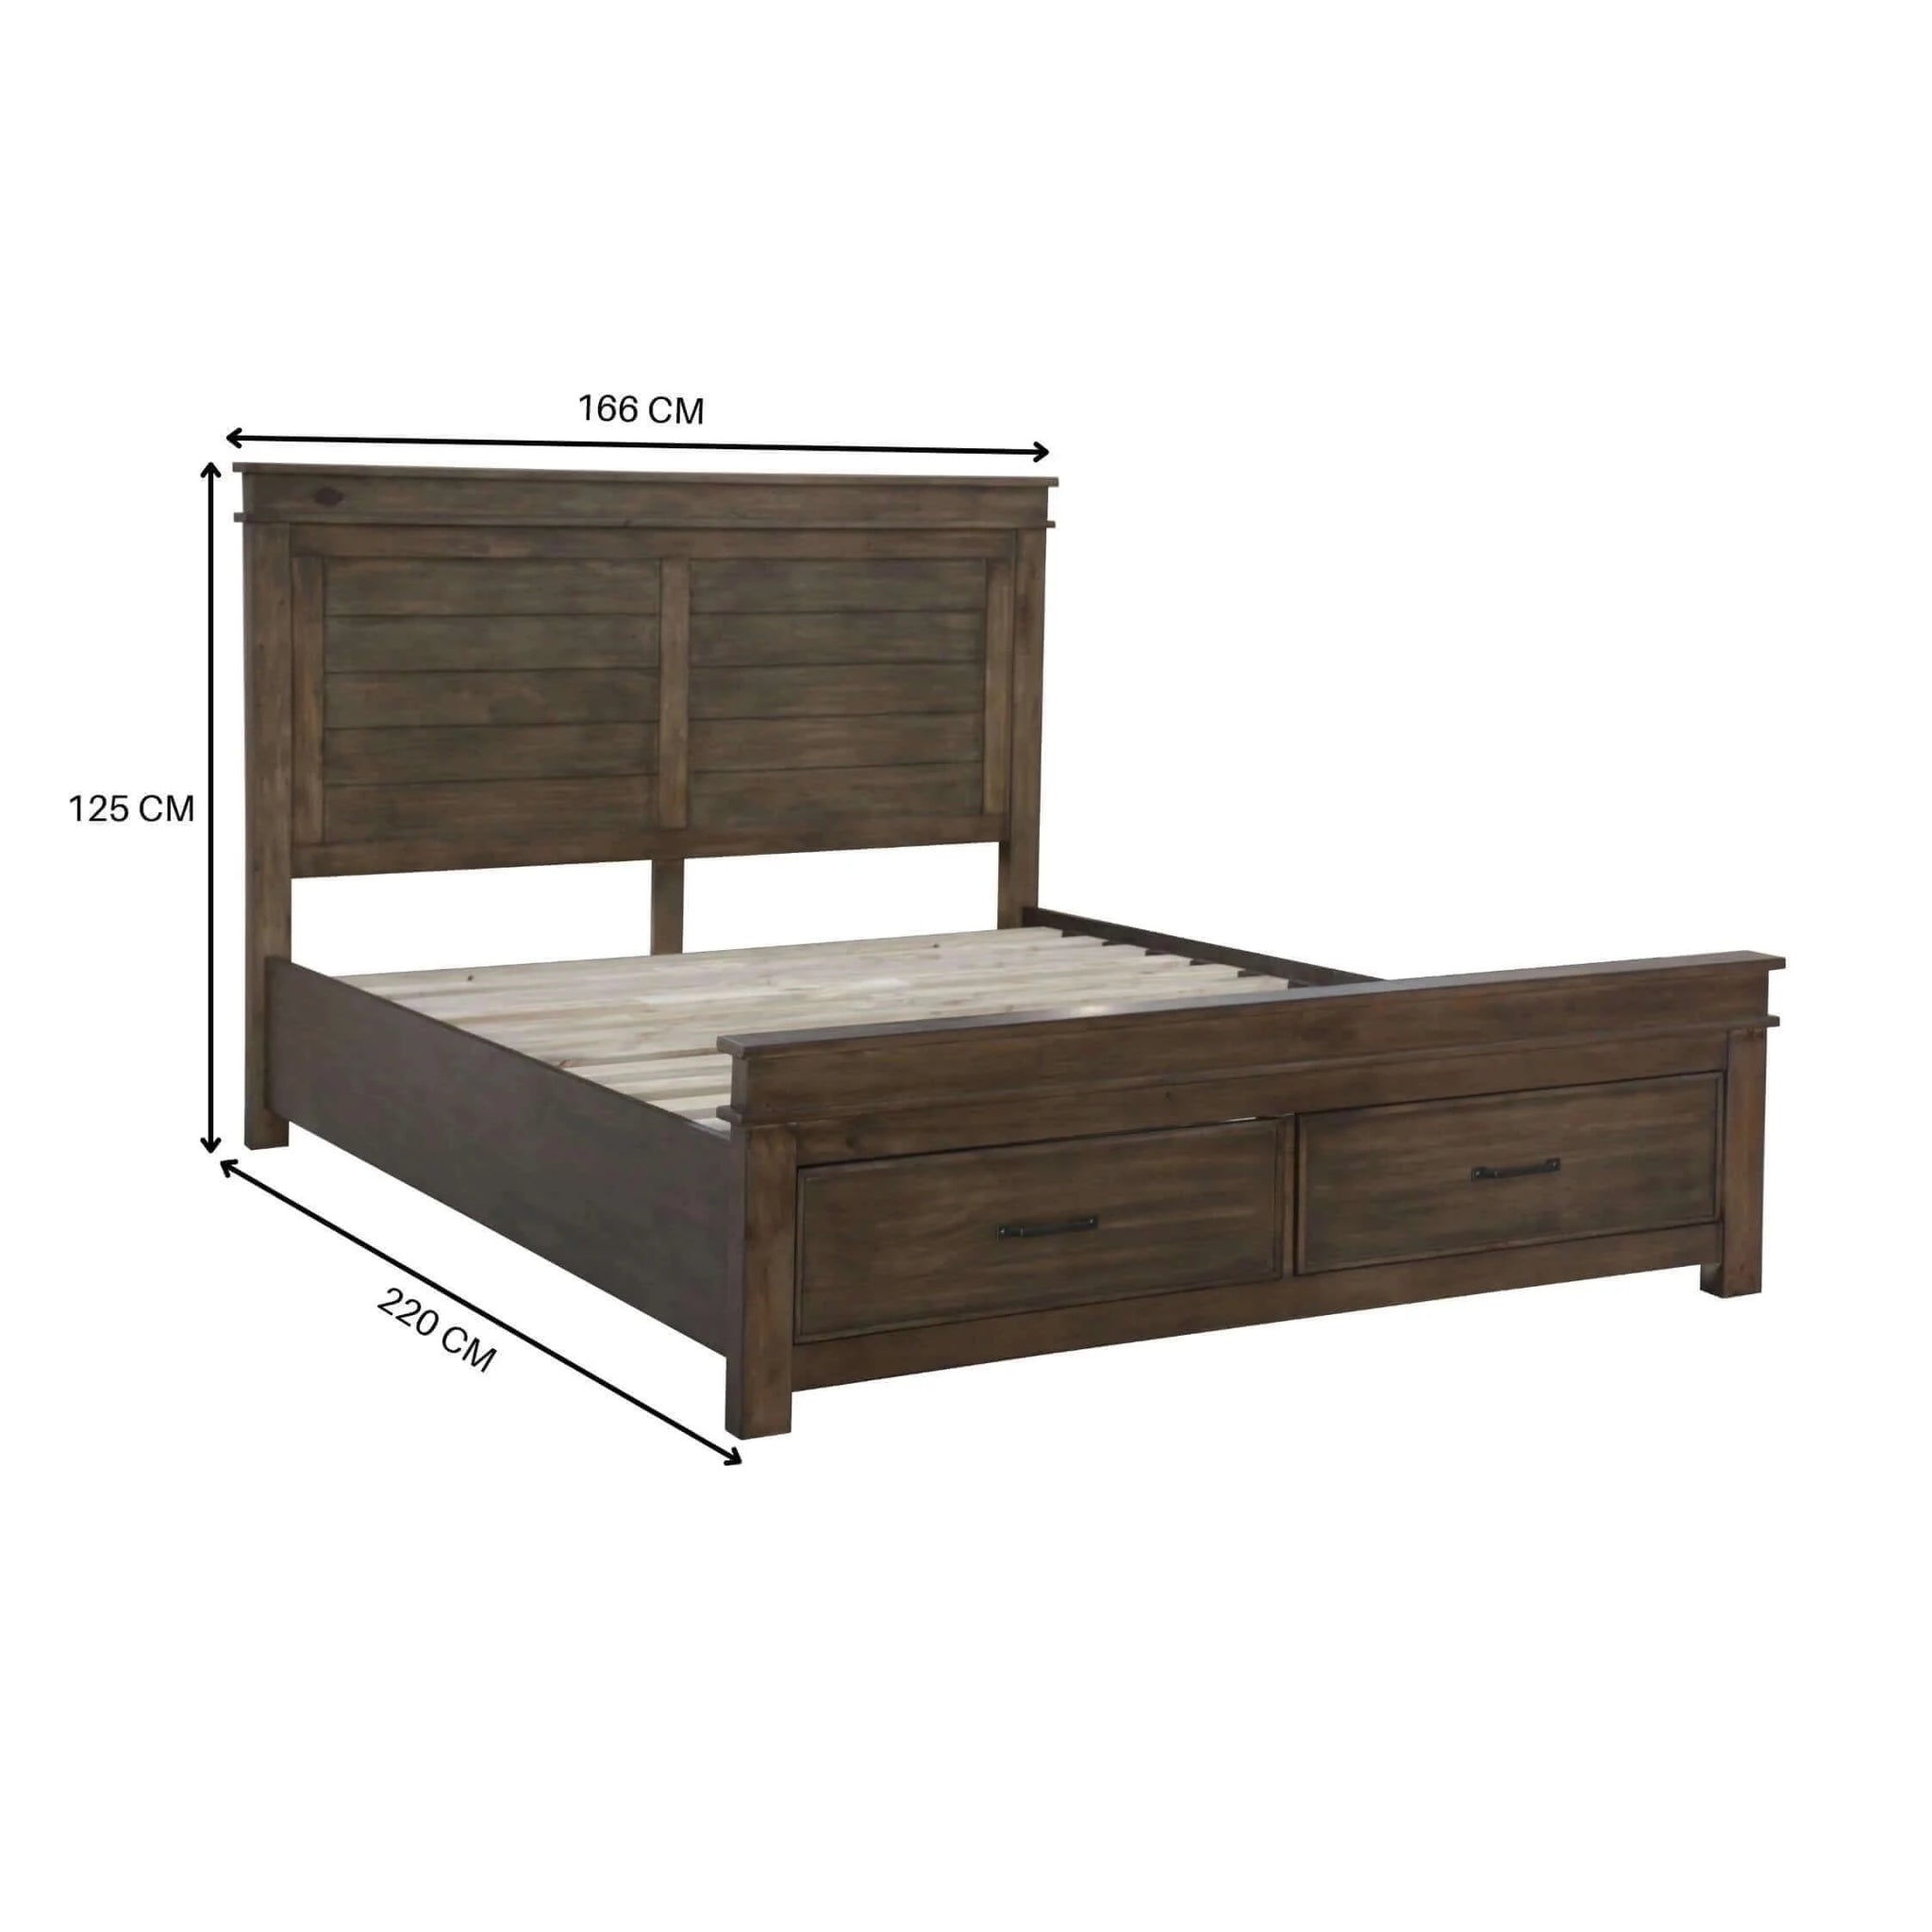 Buy lily bed frame queen size timber mattress base with storage drawers -rustic grey - upinteriors-Upinteriors